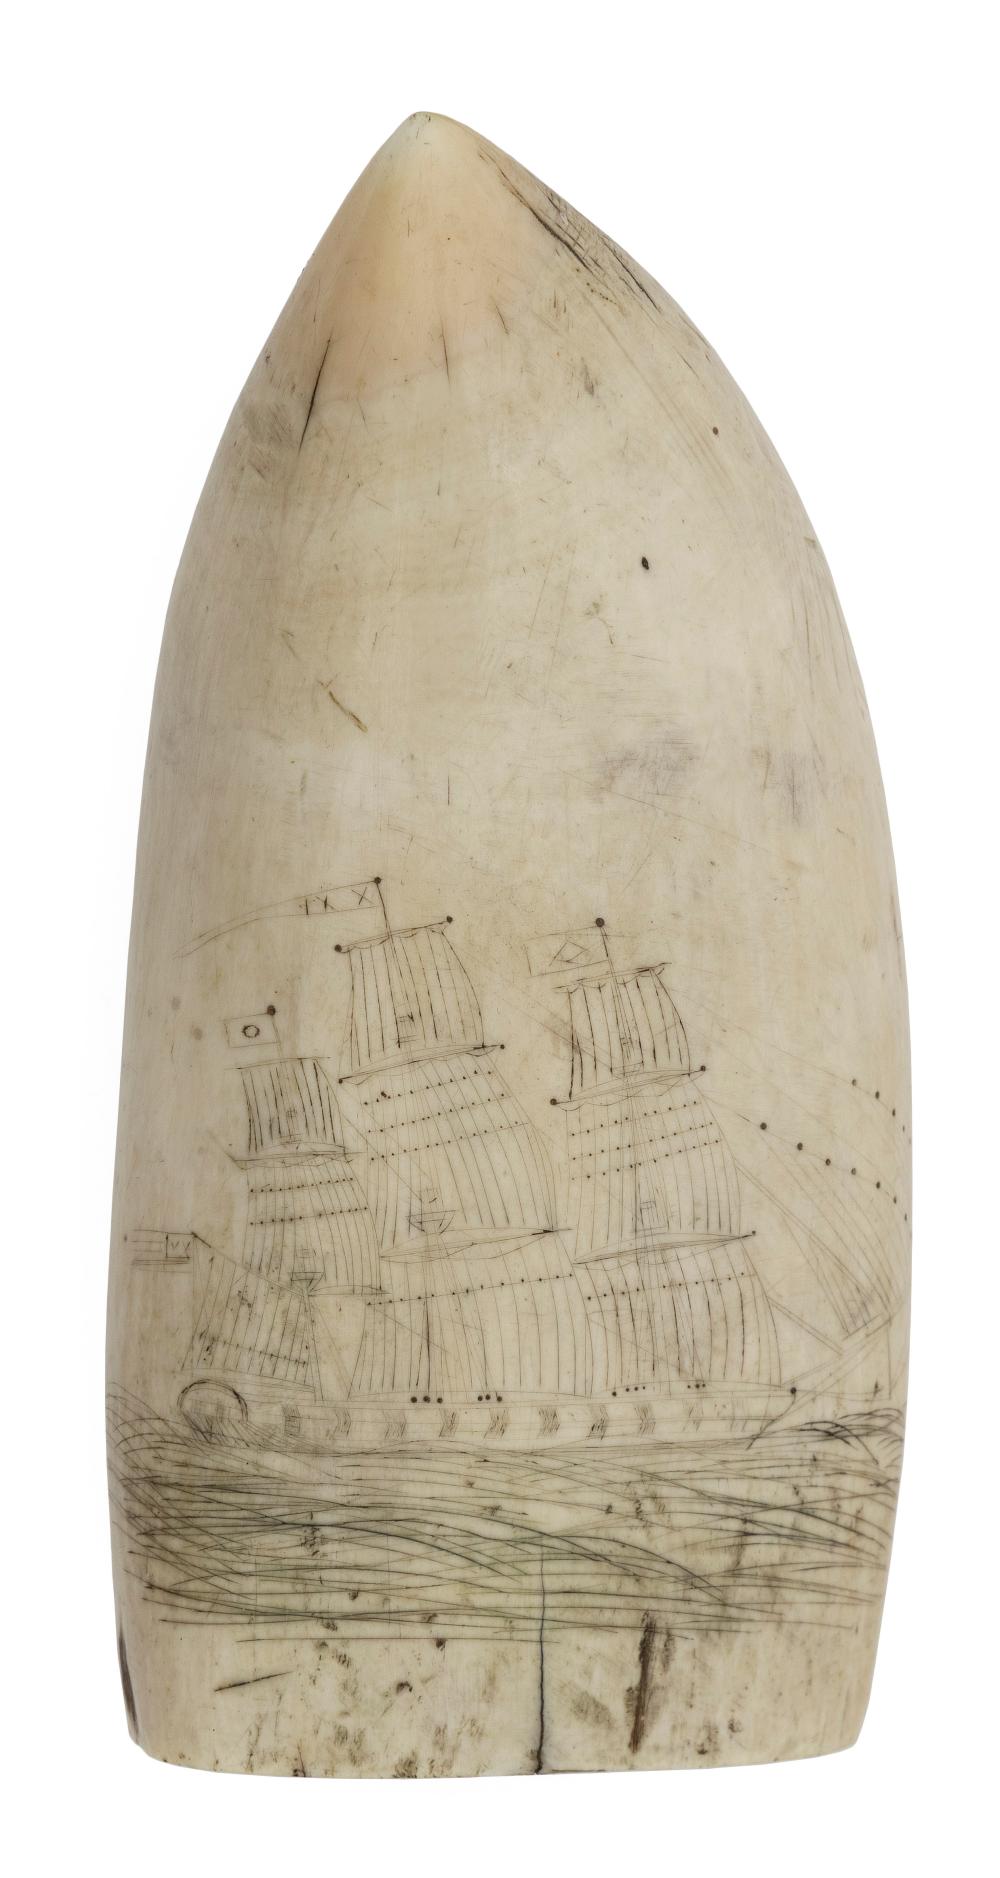 SCRIMSHAW WHALE S TOOTH WITH SHIP 3501f5